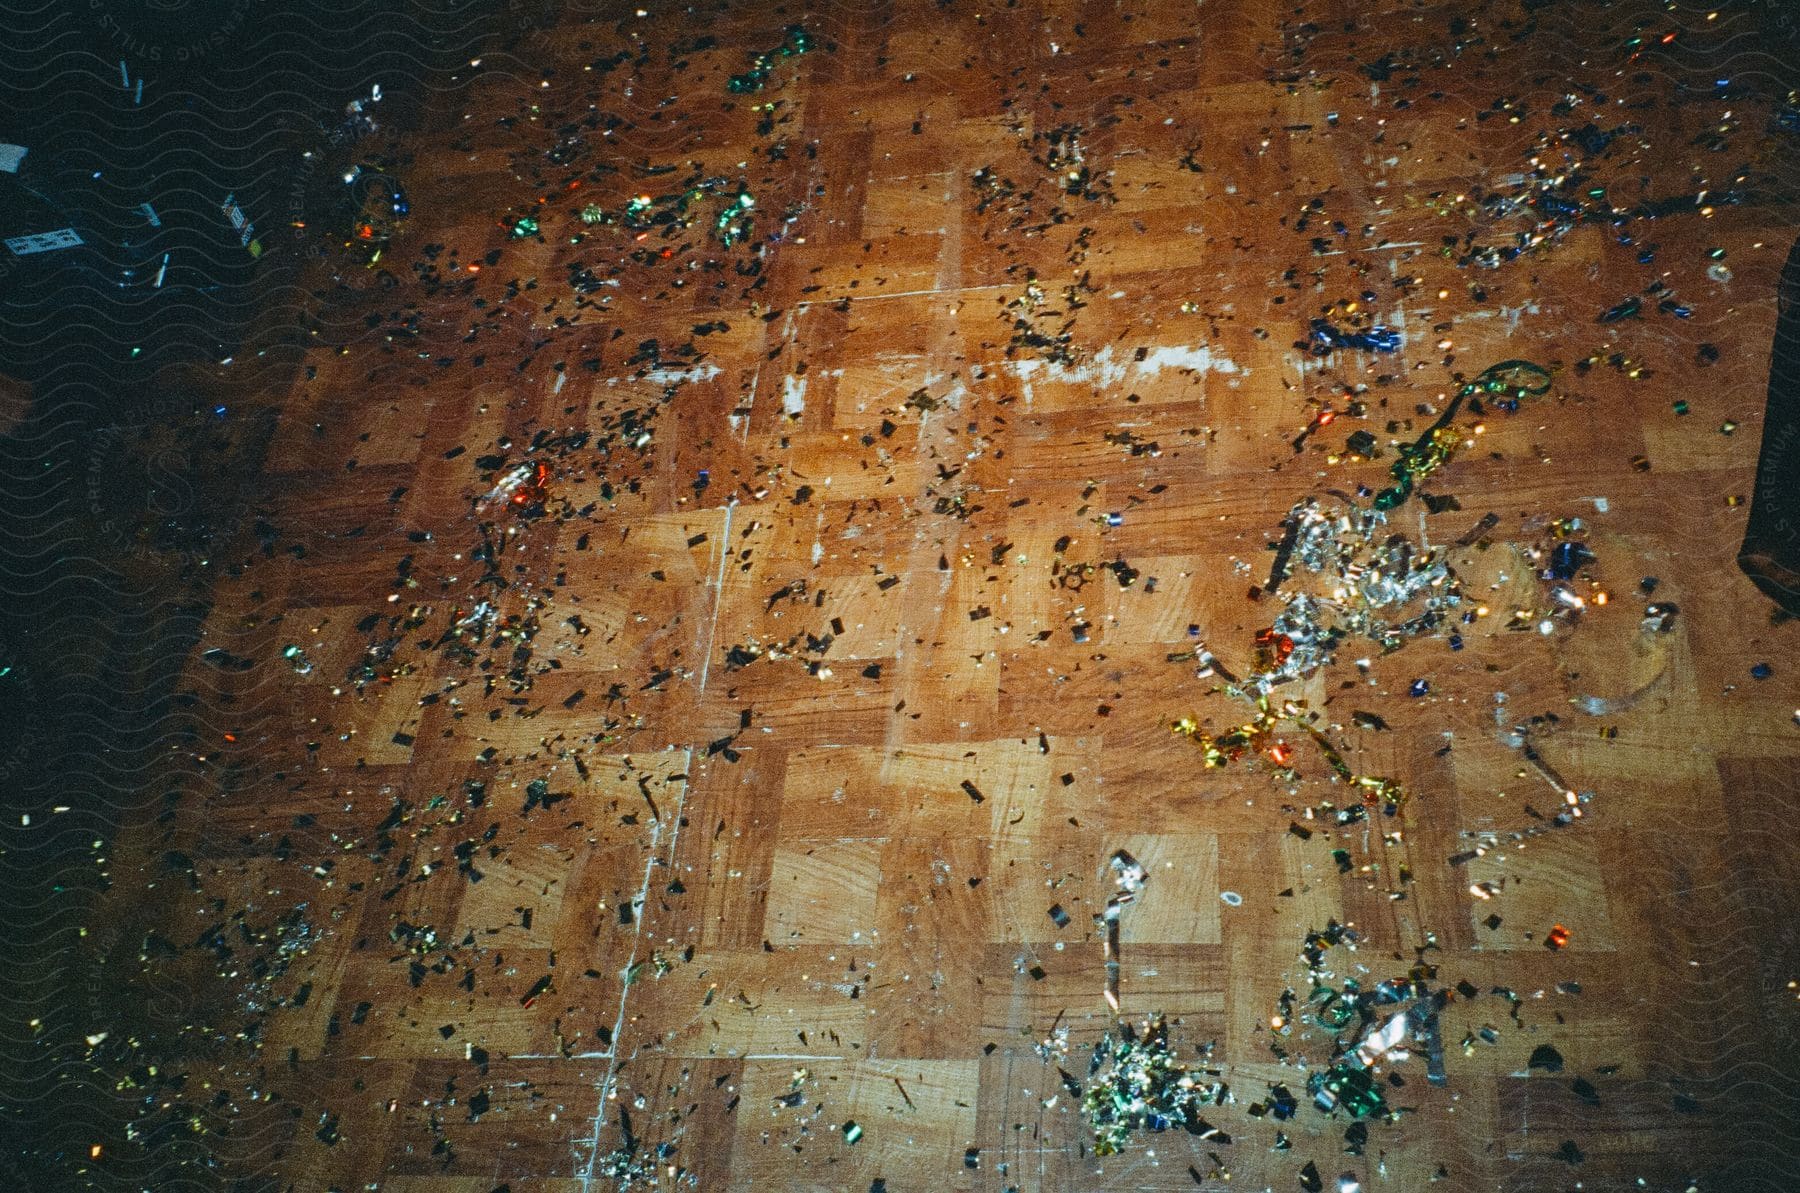 Brown cross hatched patterned linoleum floor with confetti scattered on it